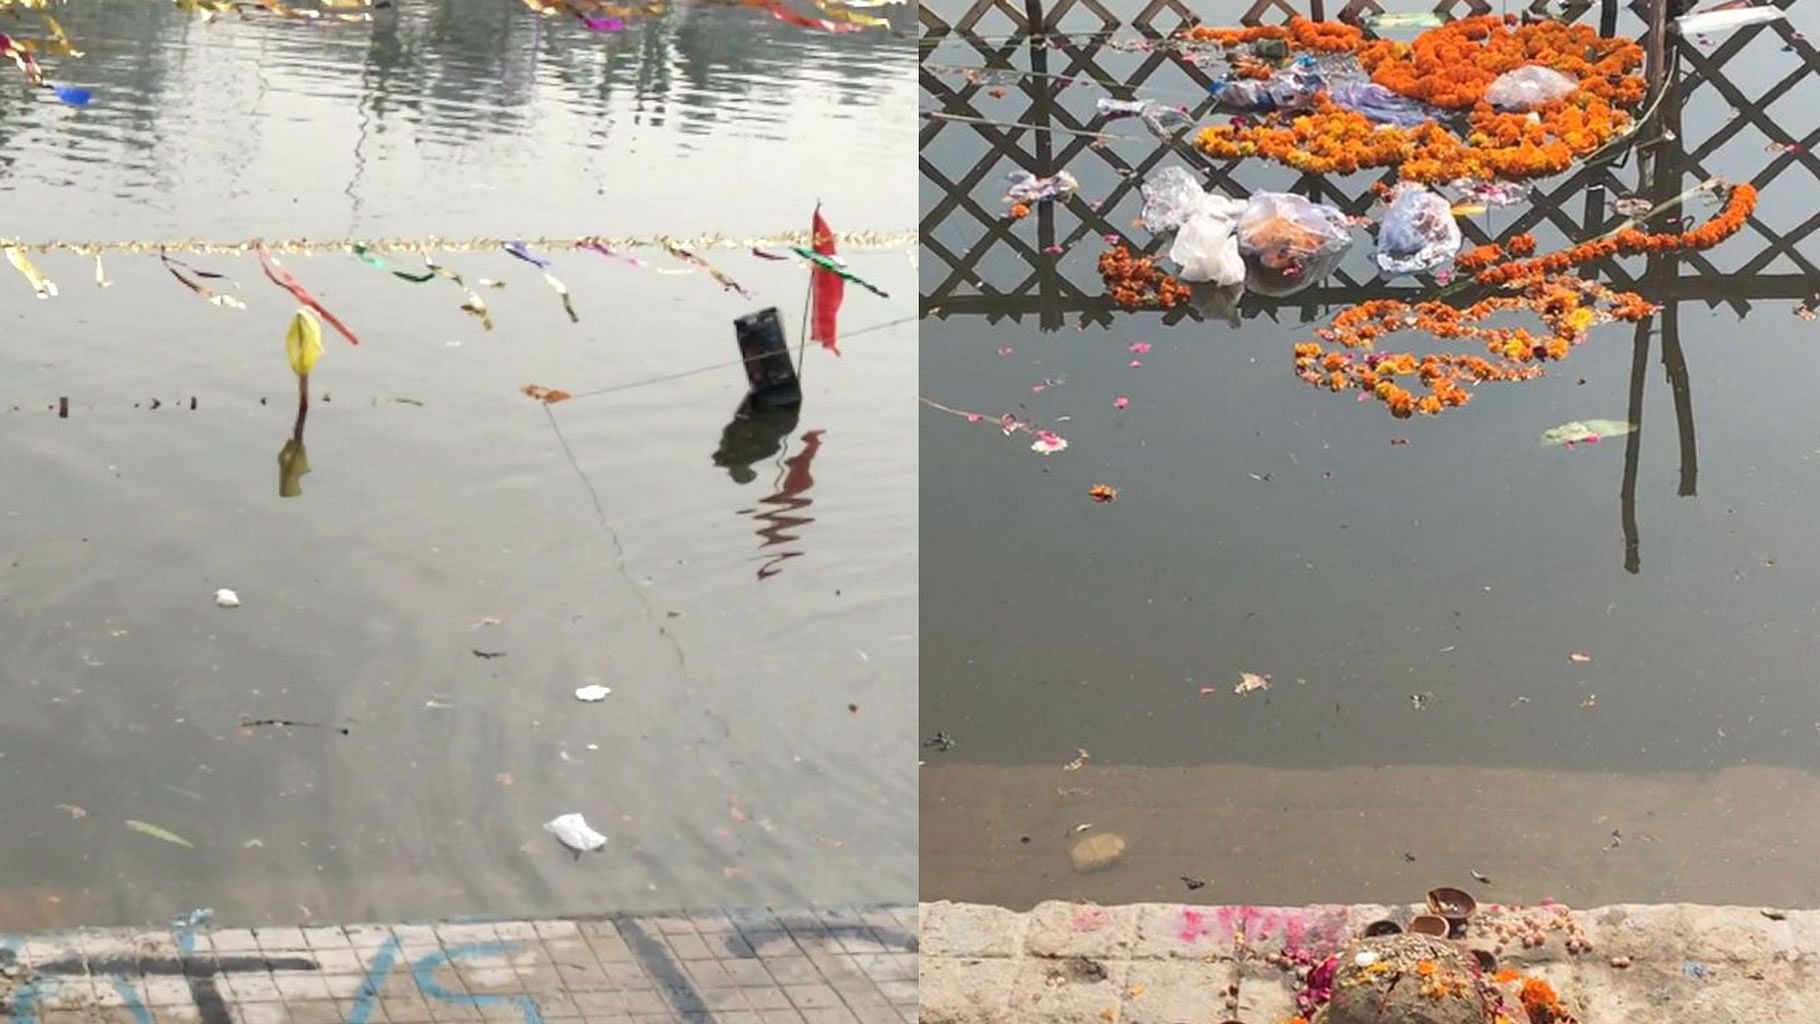 The condition of the Yamuna river before and after Chhath Puja